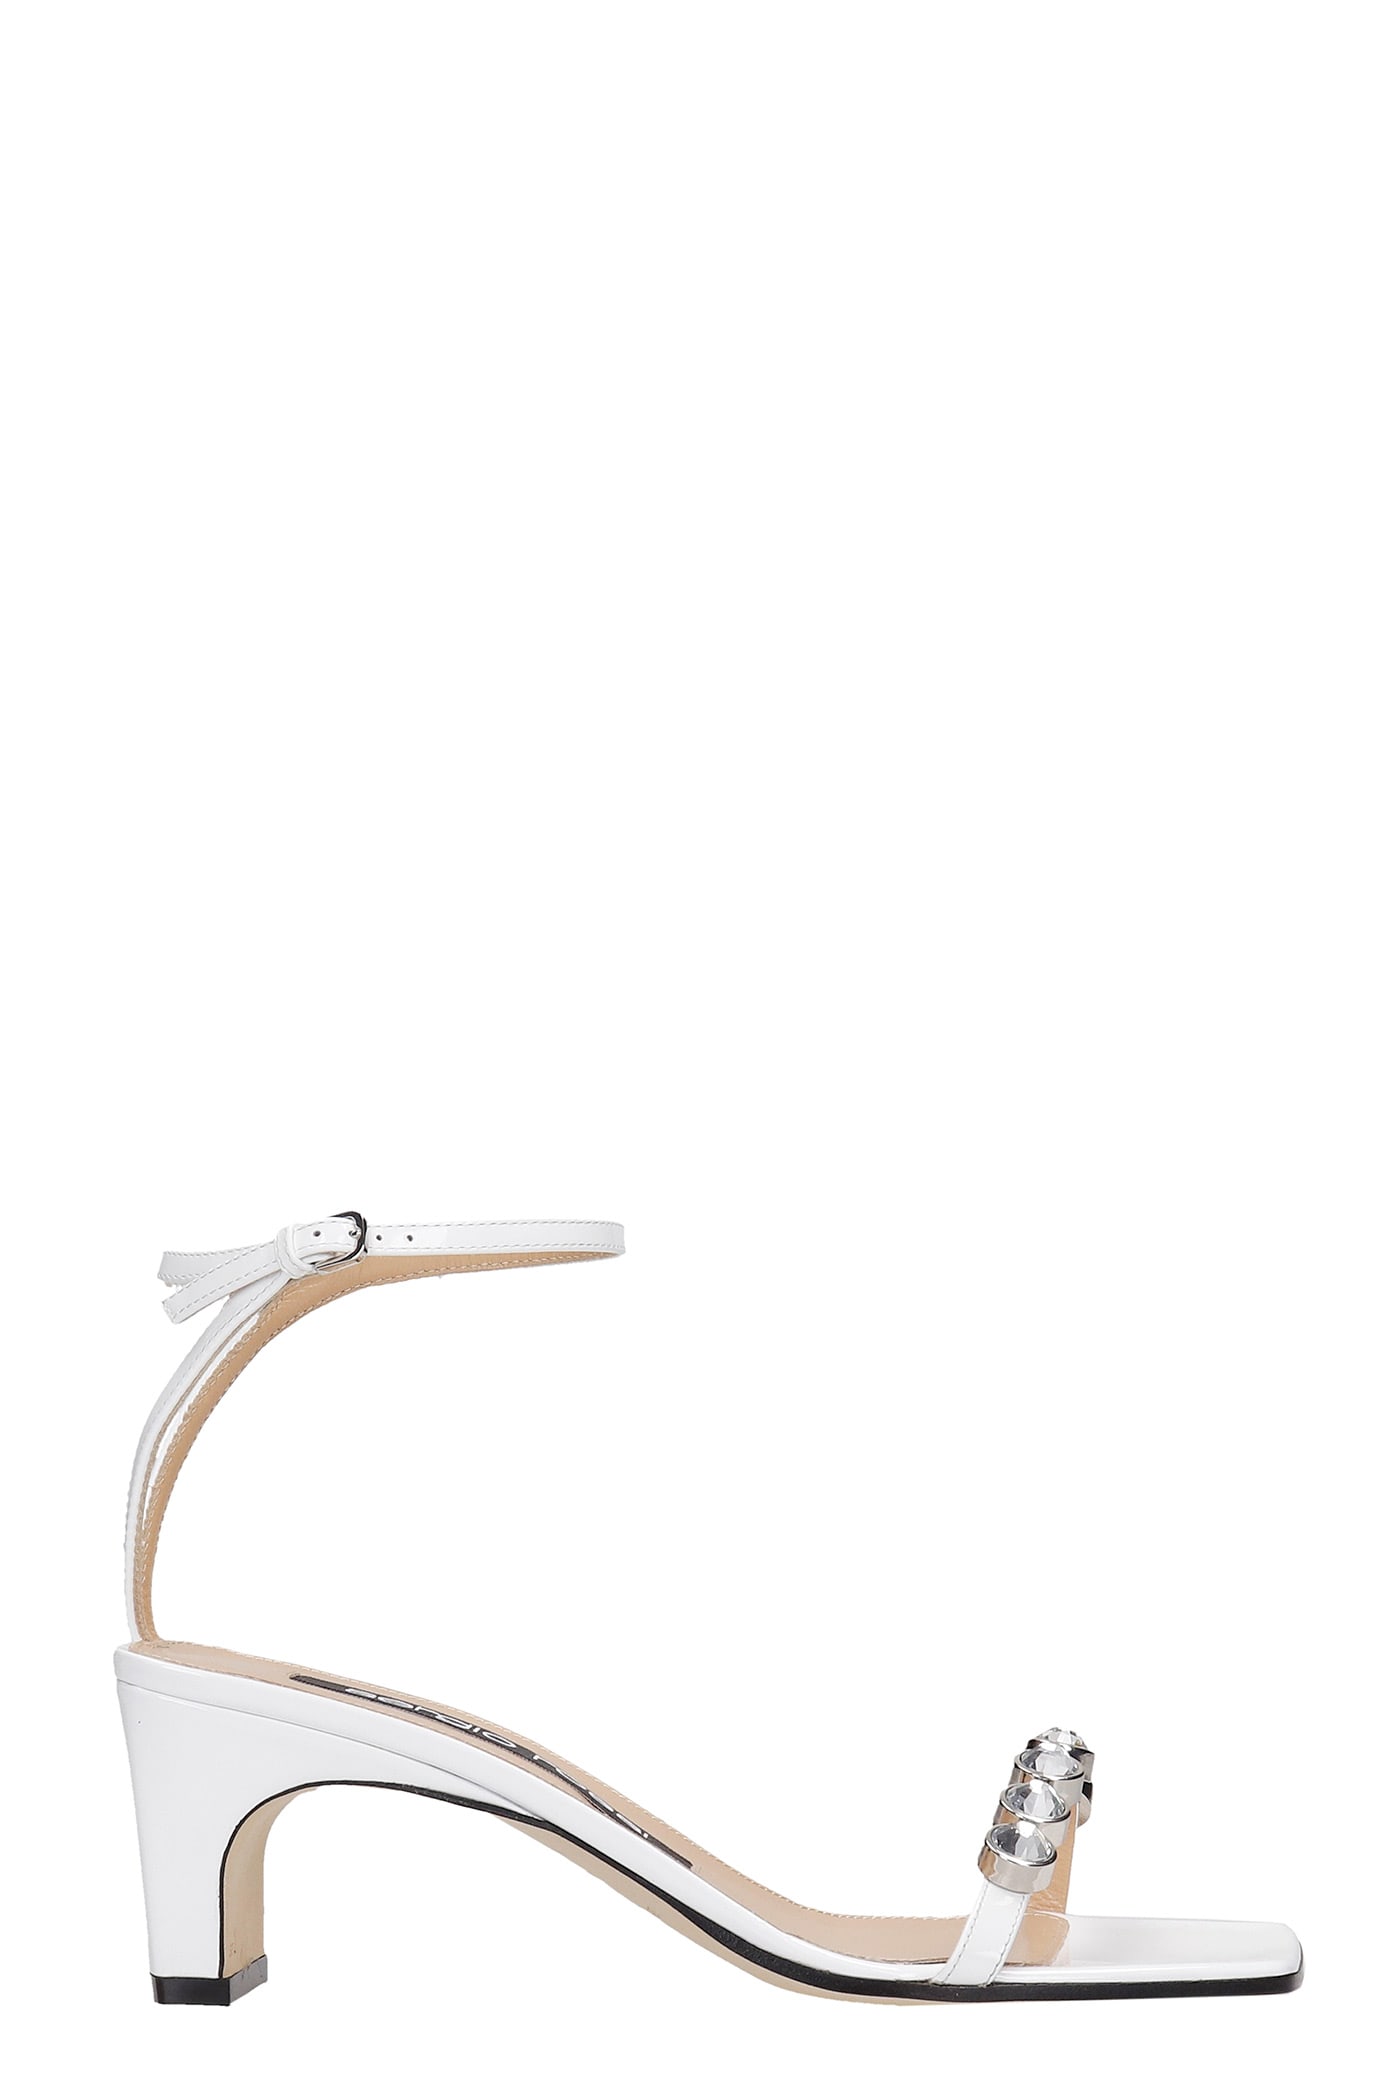 Buy Sergio Rossi Sandals In White Patent Leather online, shop Sergio Rossi shoes with free shipping